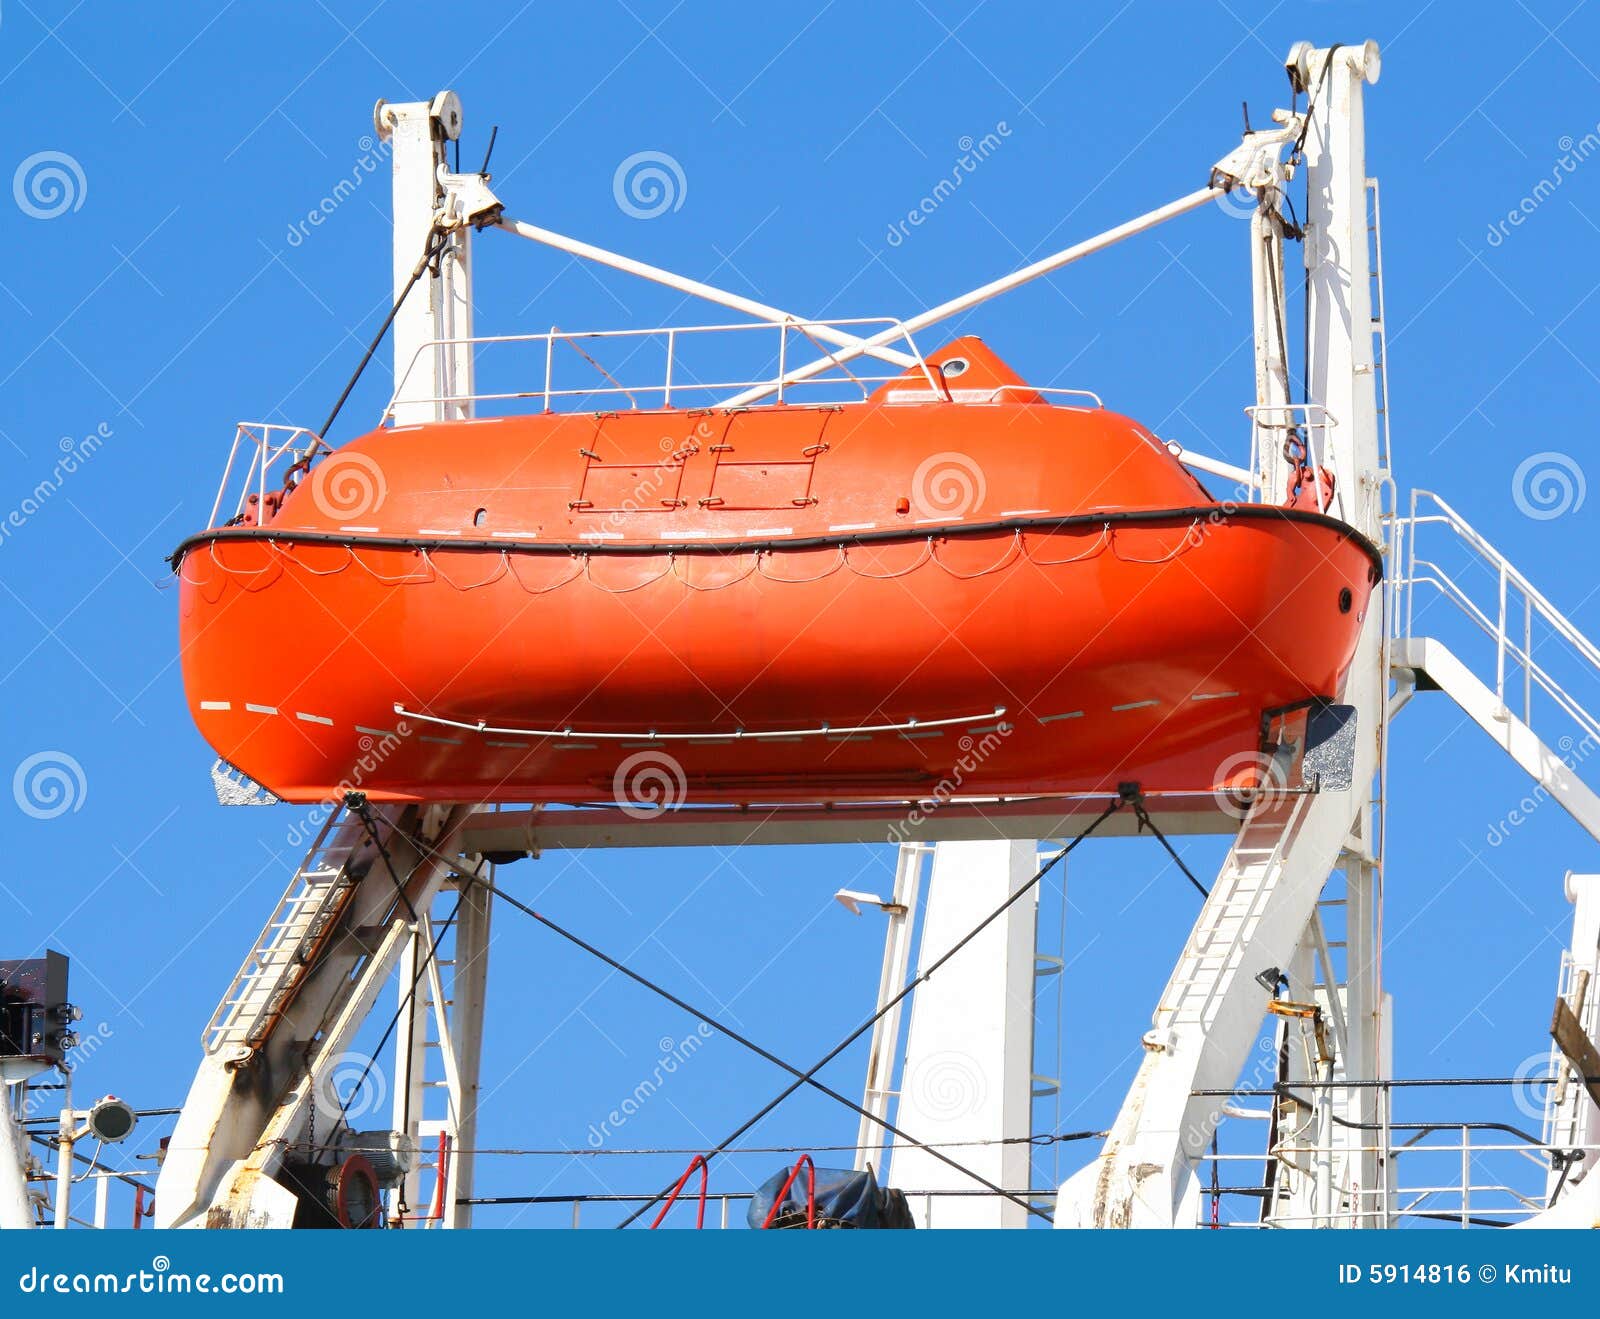 Red Lifeboat On Crane Lift Royalty Free Stock Image 